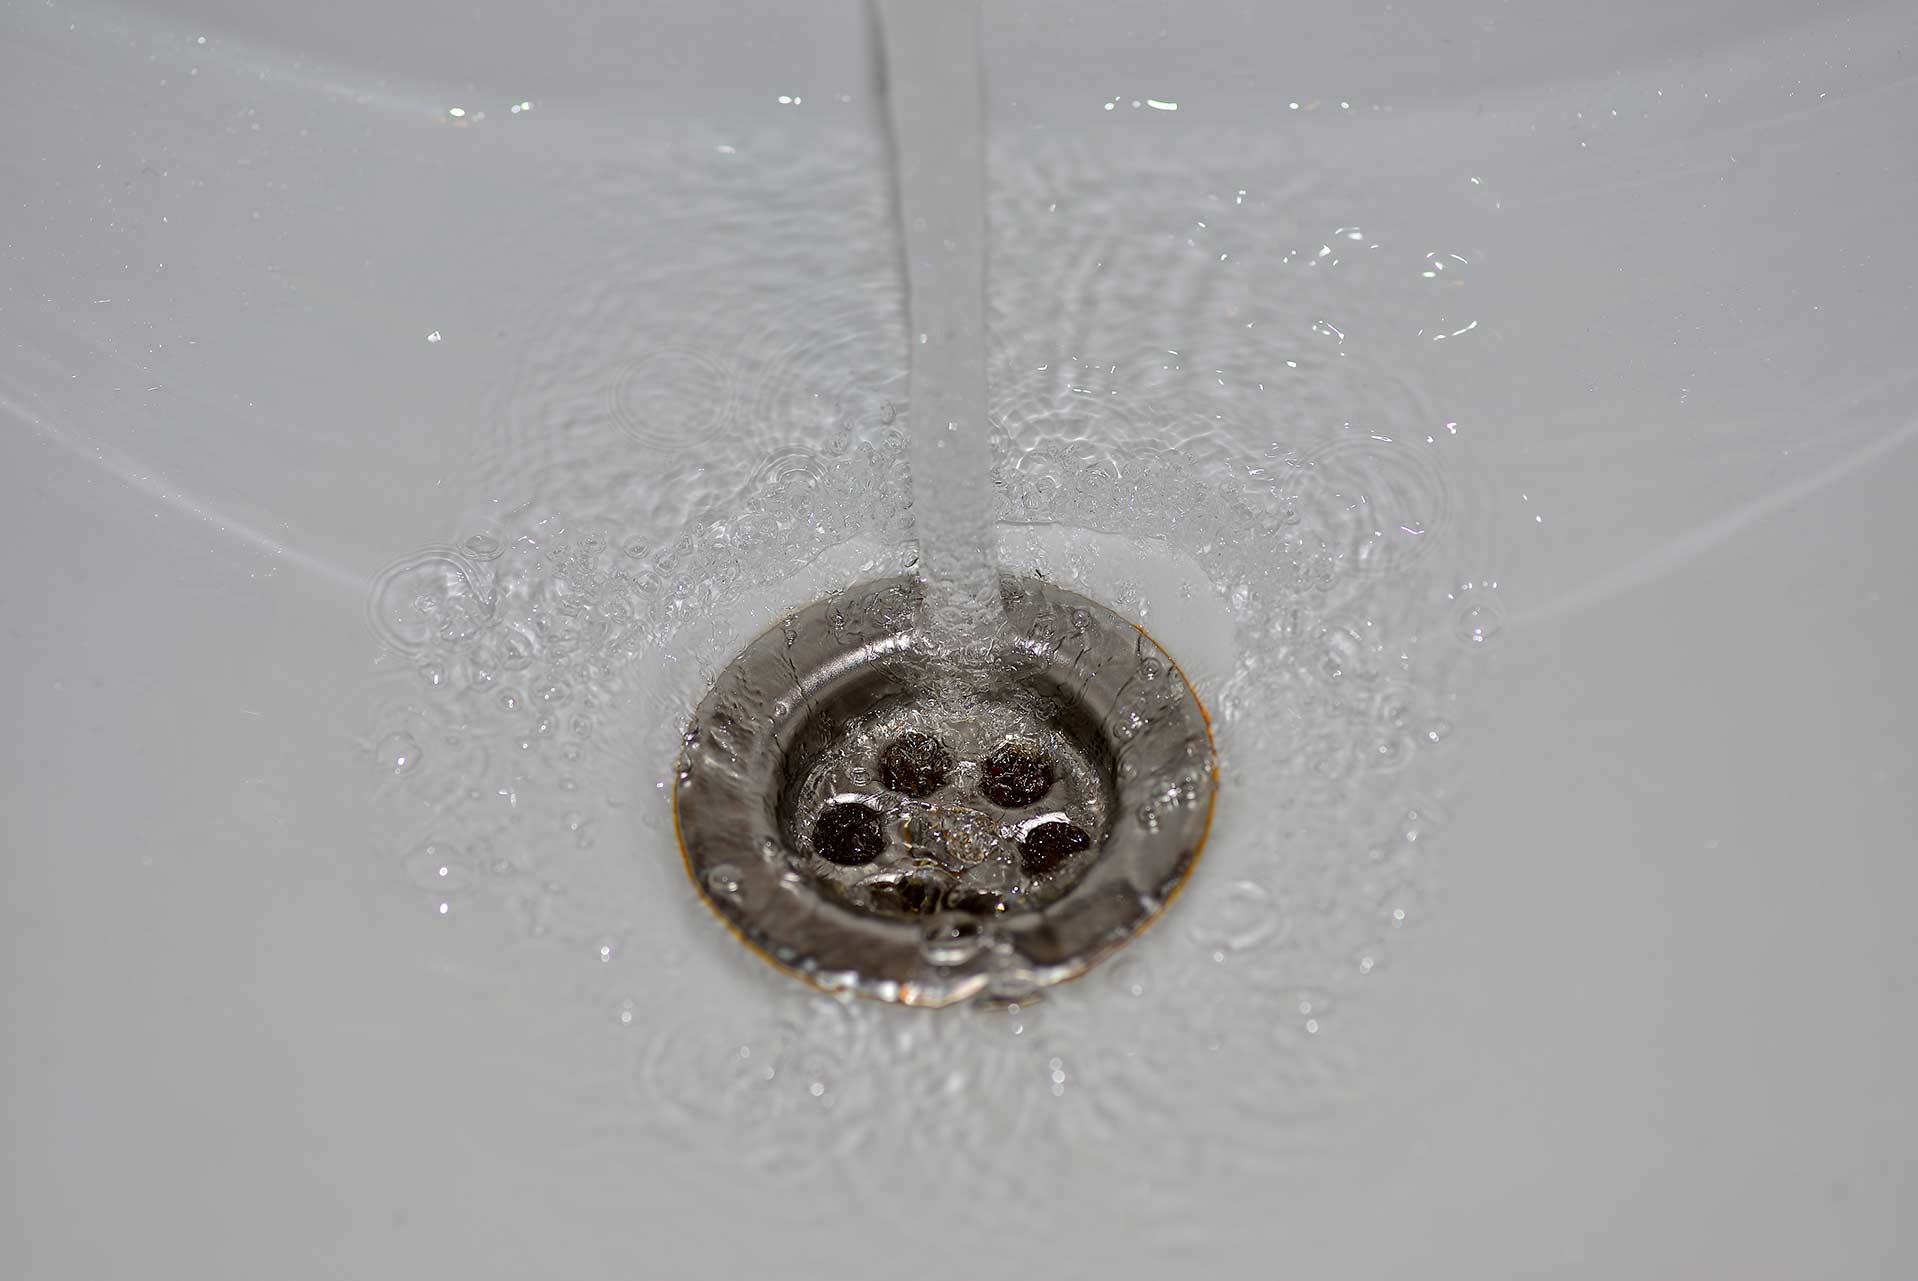 A2B Drains provides services to unblock blocked sinks and drains for properties in Ilkeston.